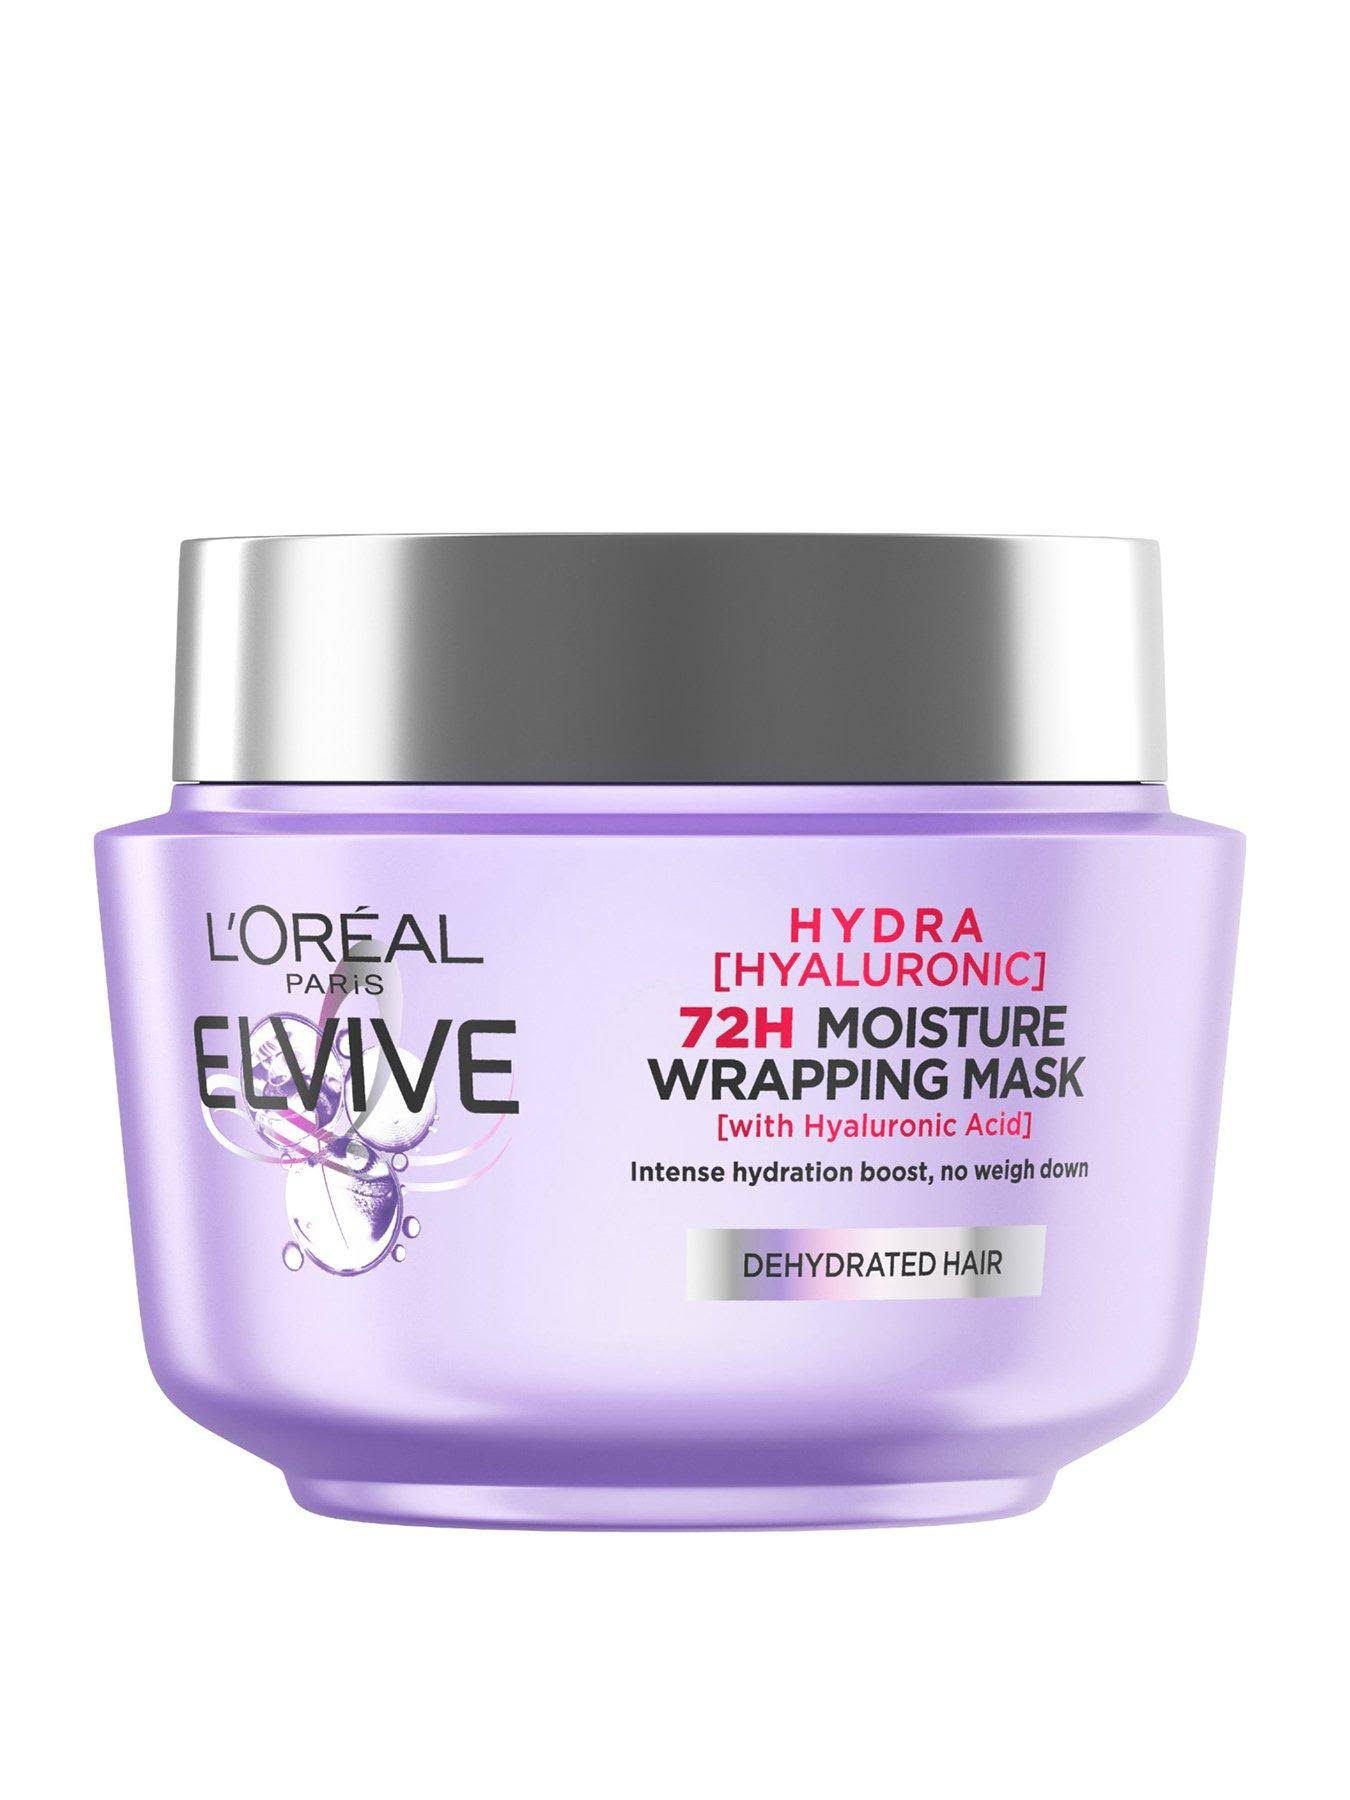 L'Oreal Elvive Hydra Hyaluronic 72H Moisture Wrapping Mask Dehydrated Hair 300ml